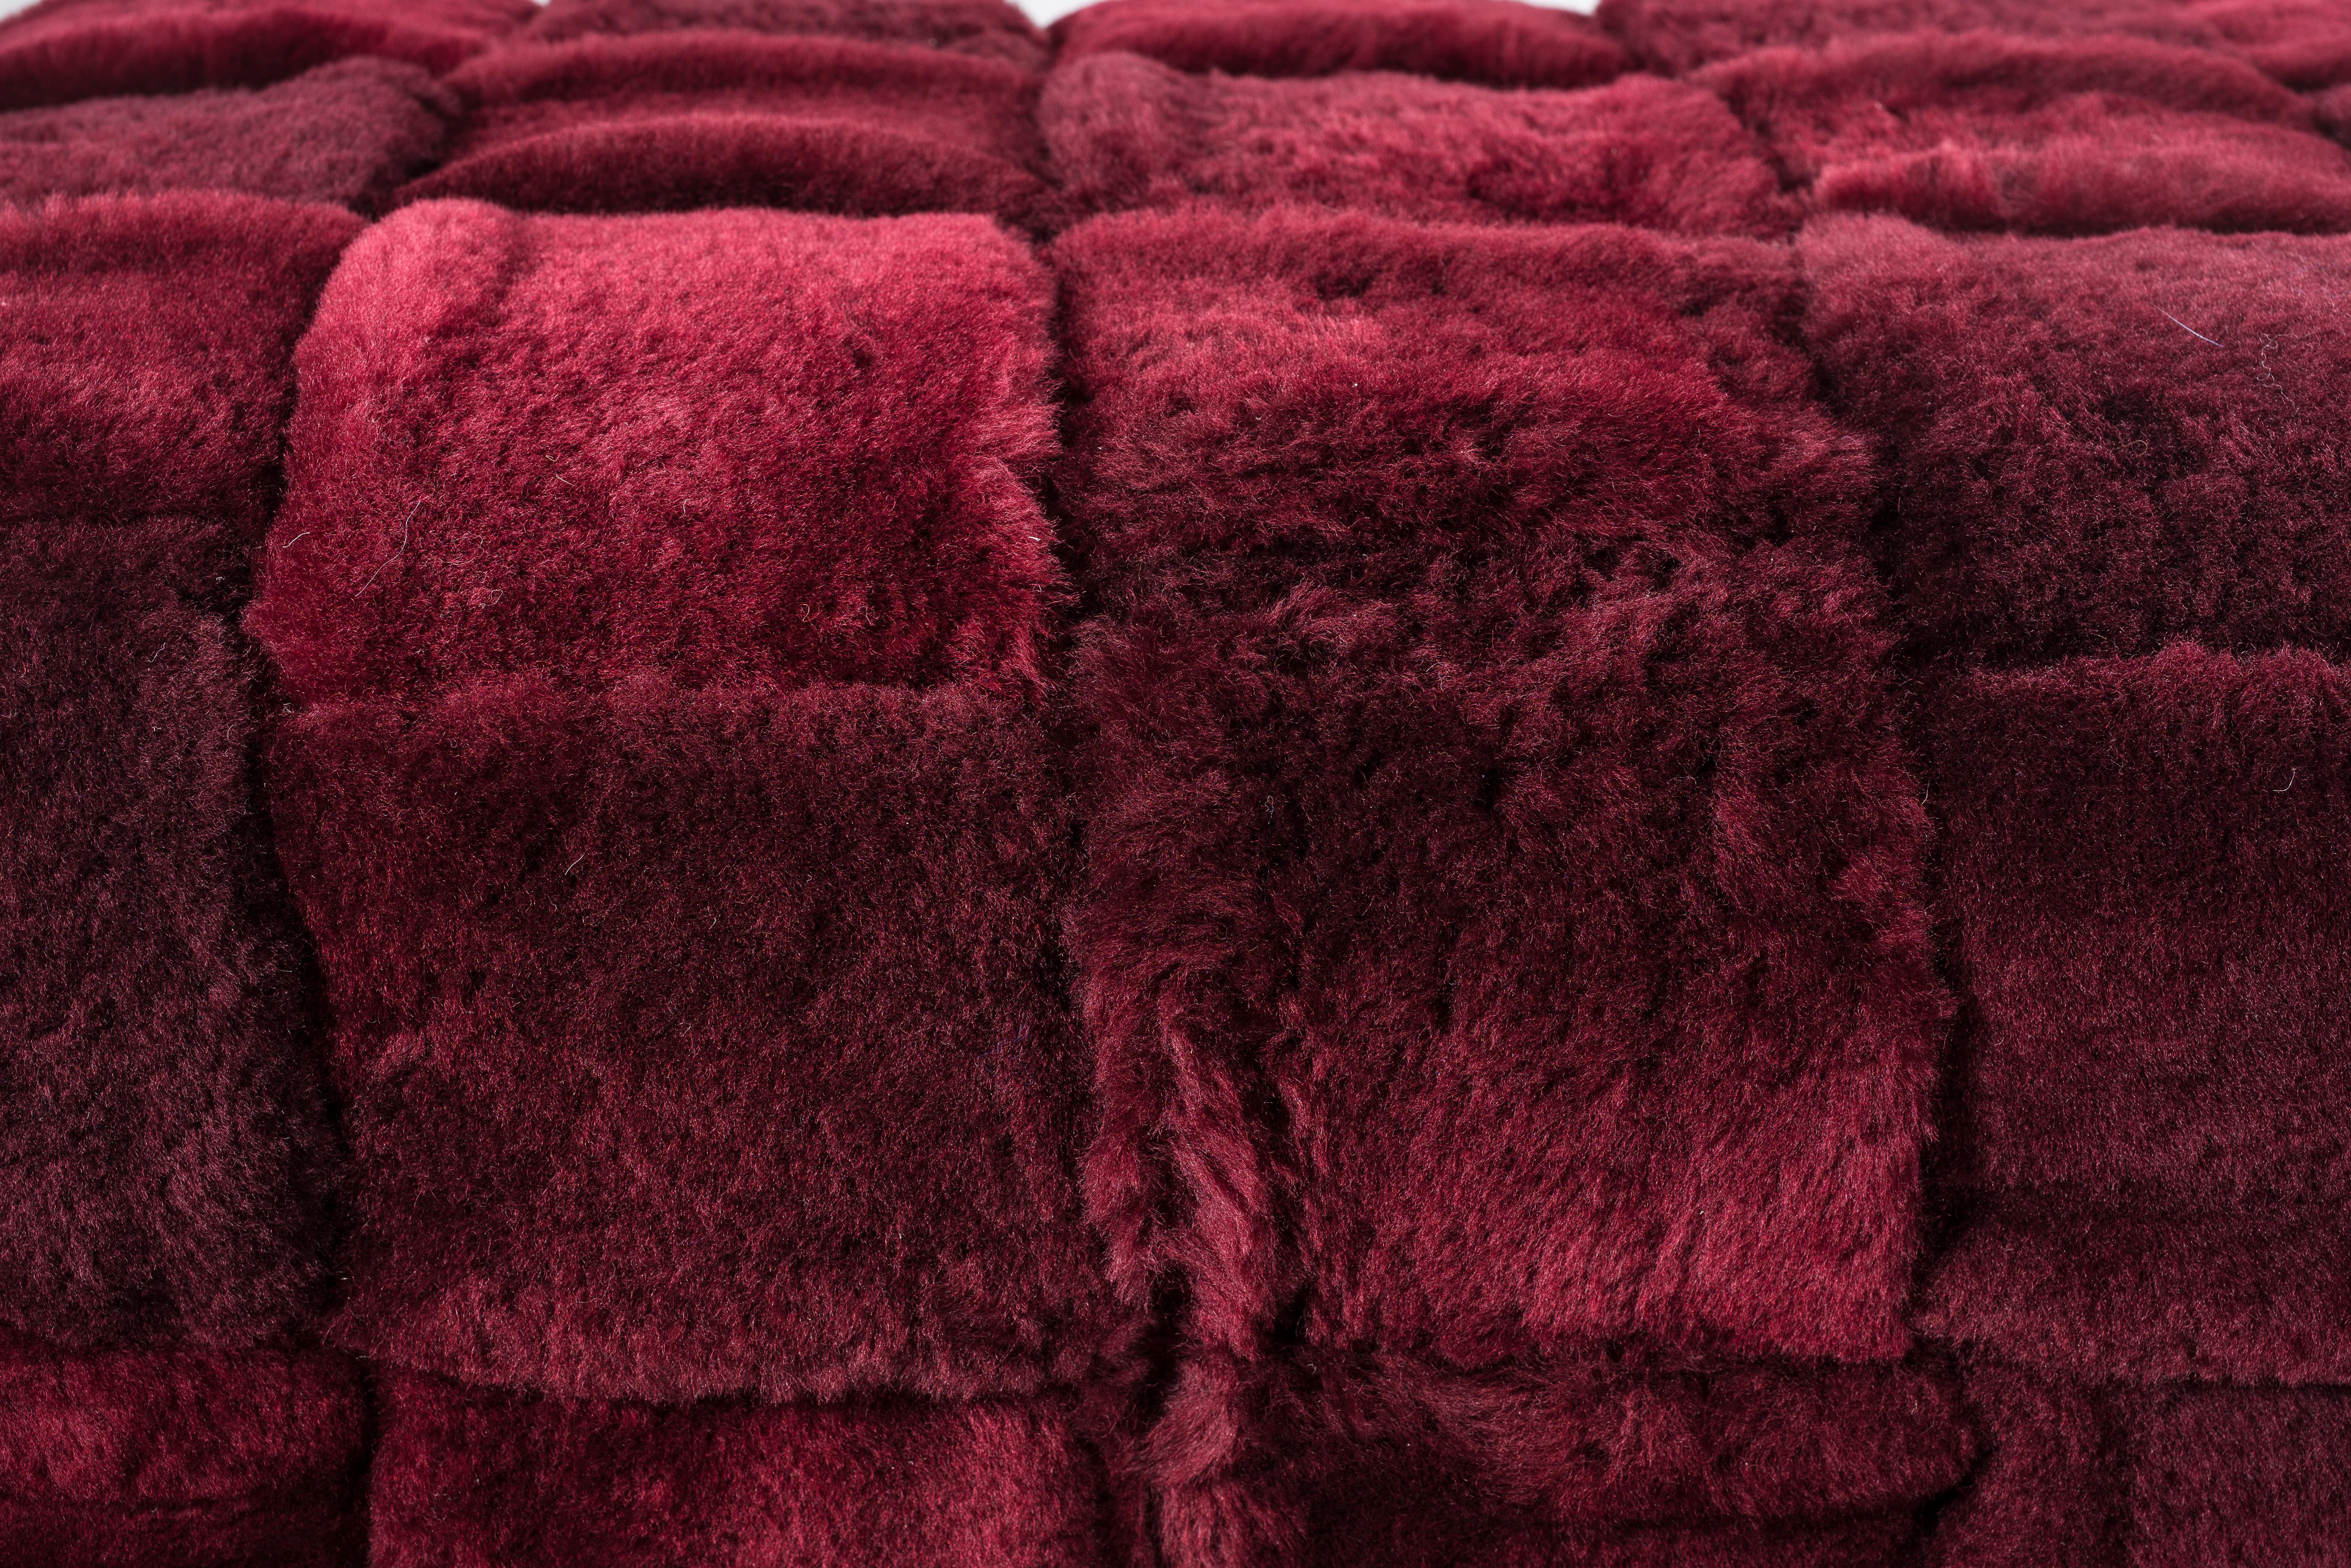 Ottoman measures: 90 x 55 x H 55 cm
Braided shearling strips
Dyed shared shearling, color Merlot
Brass legs.
  